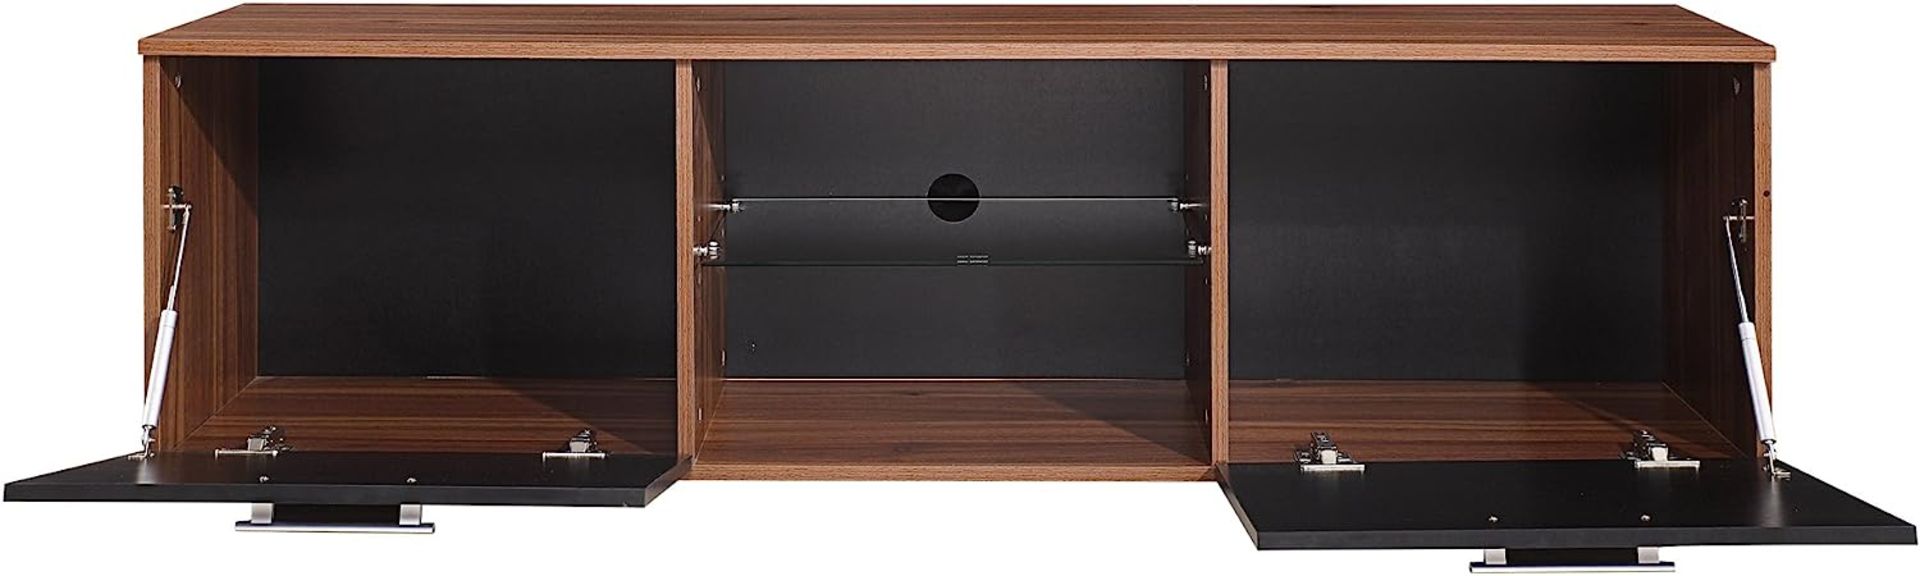 10 X BRAND NEW MODERN 160CM TV STAND CABINET UNIT WITH HIGH GLOSS DOORS (BLACK ON WALNUT) - Image 5 of 9